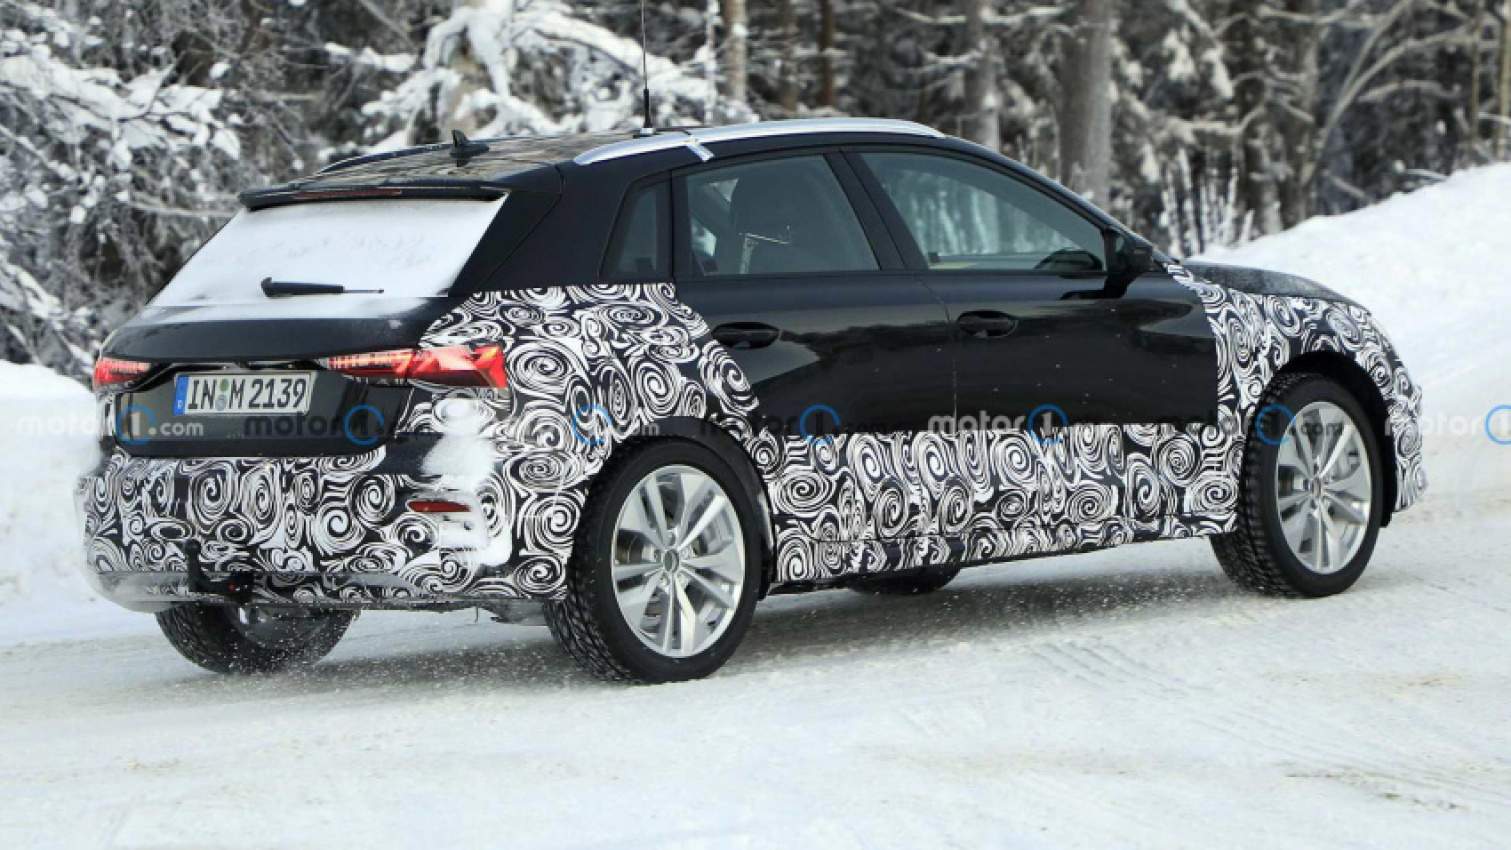 audi, autos, cars, audi a3, vnex, high-riding audi a3 spied in the snow looking like an allroad